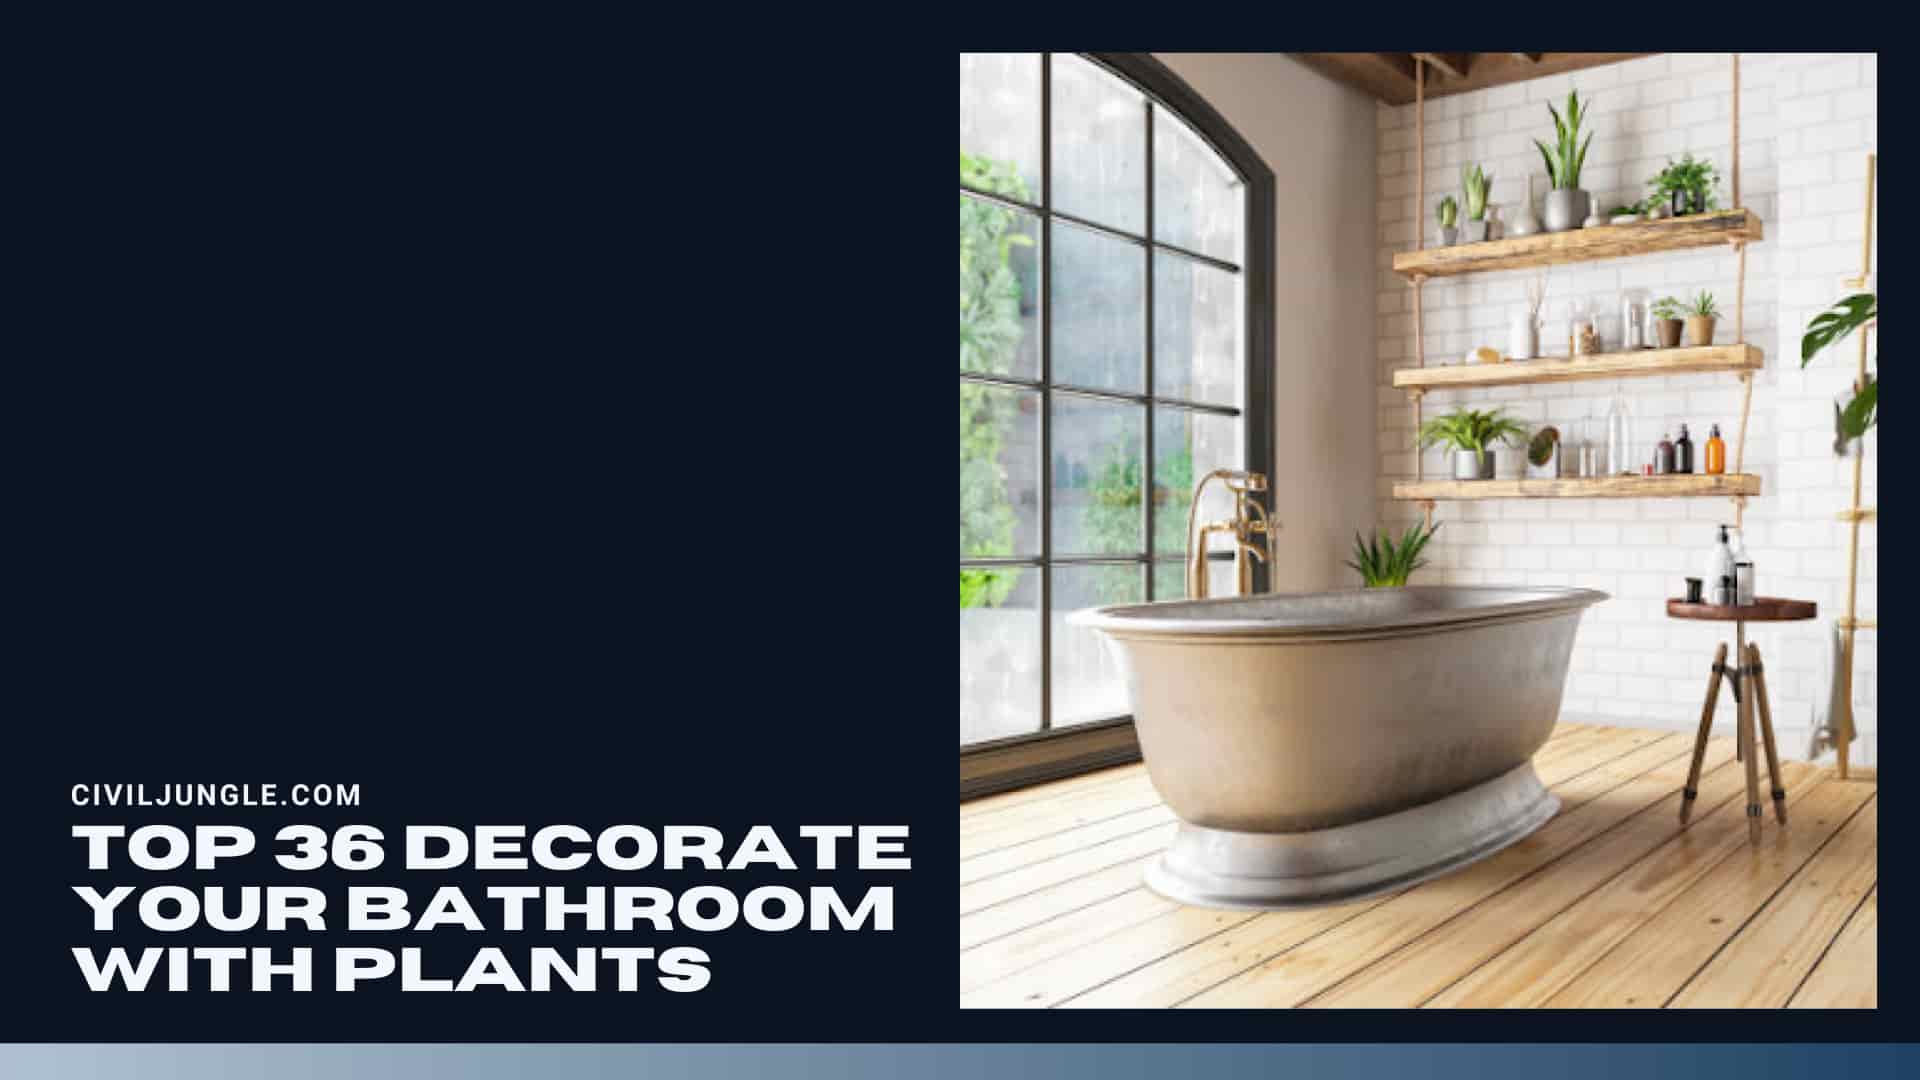 Top 36 Decorate Your Bathroom With Plants